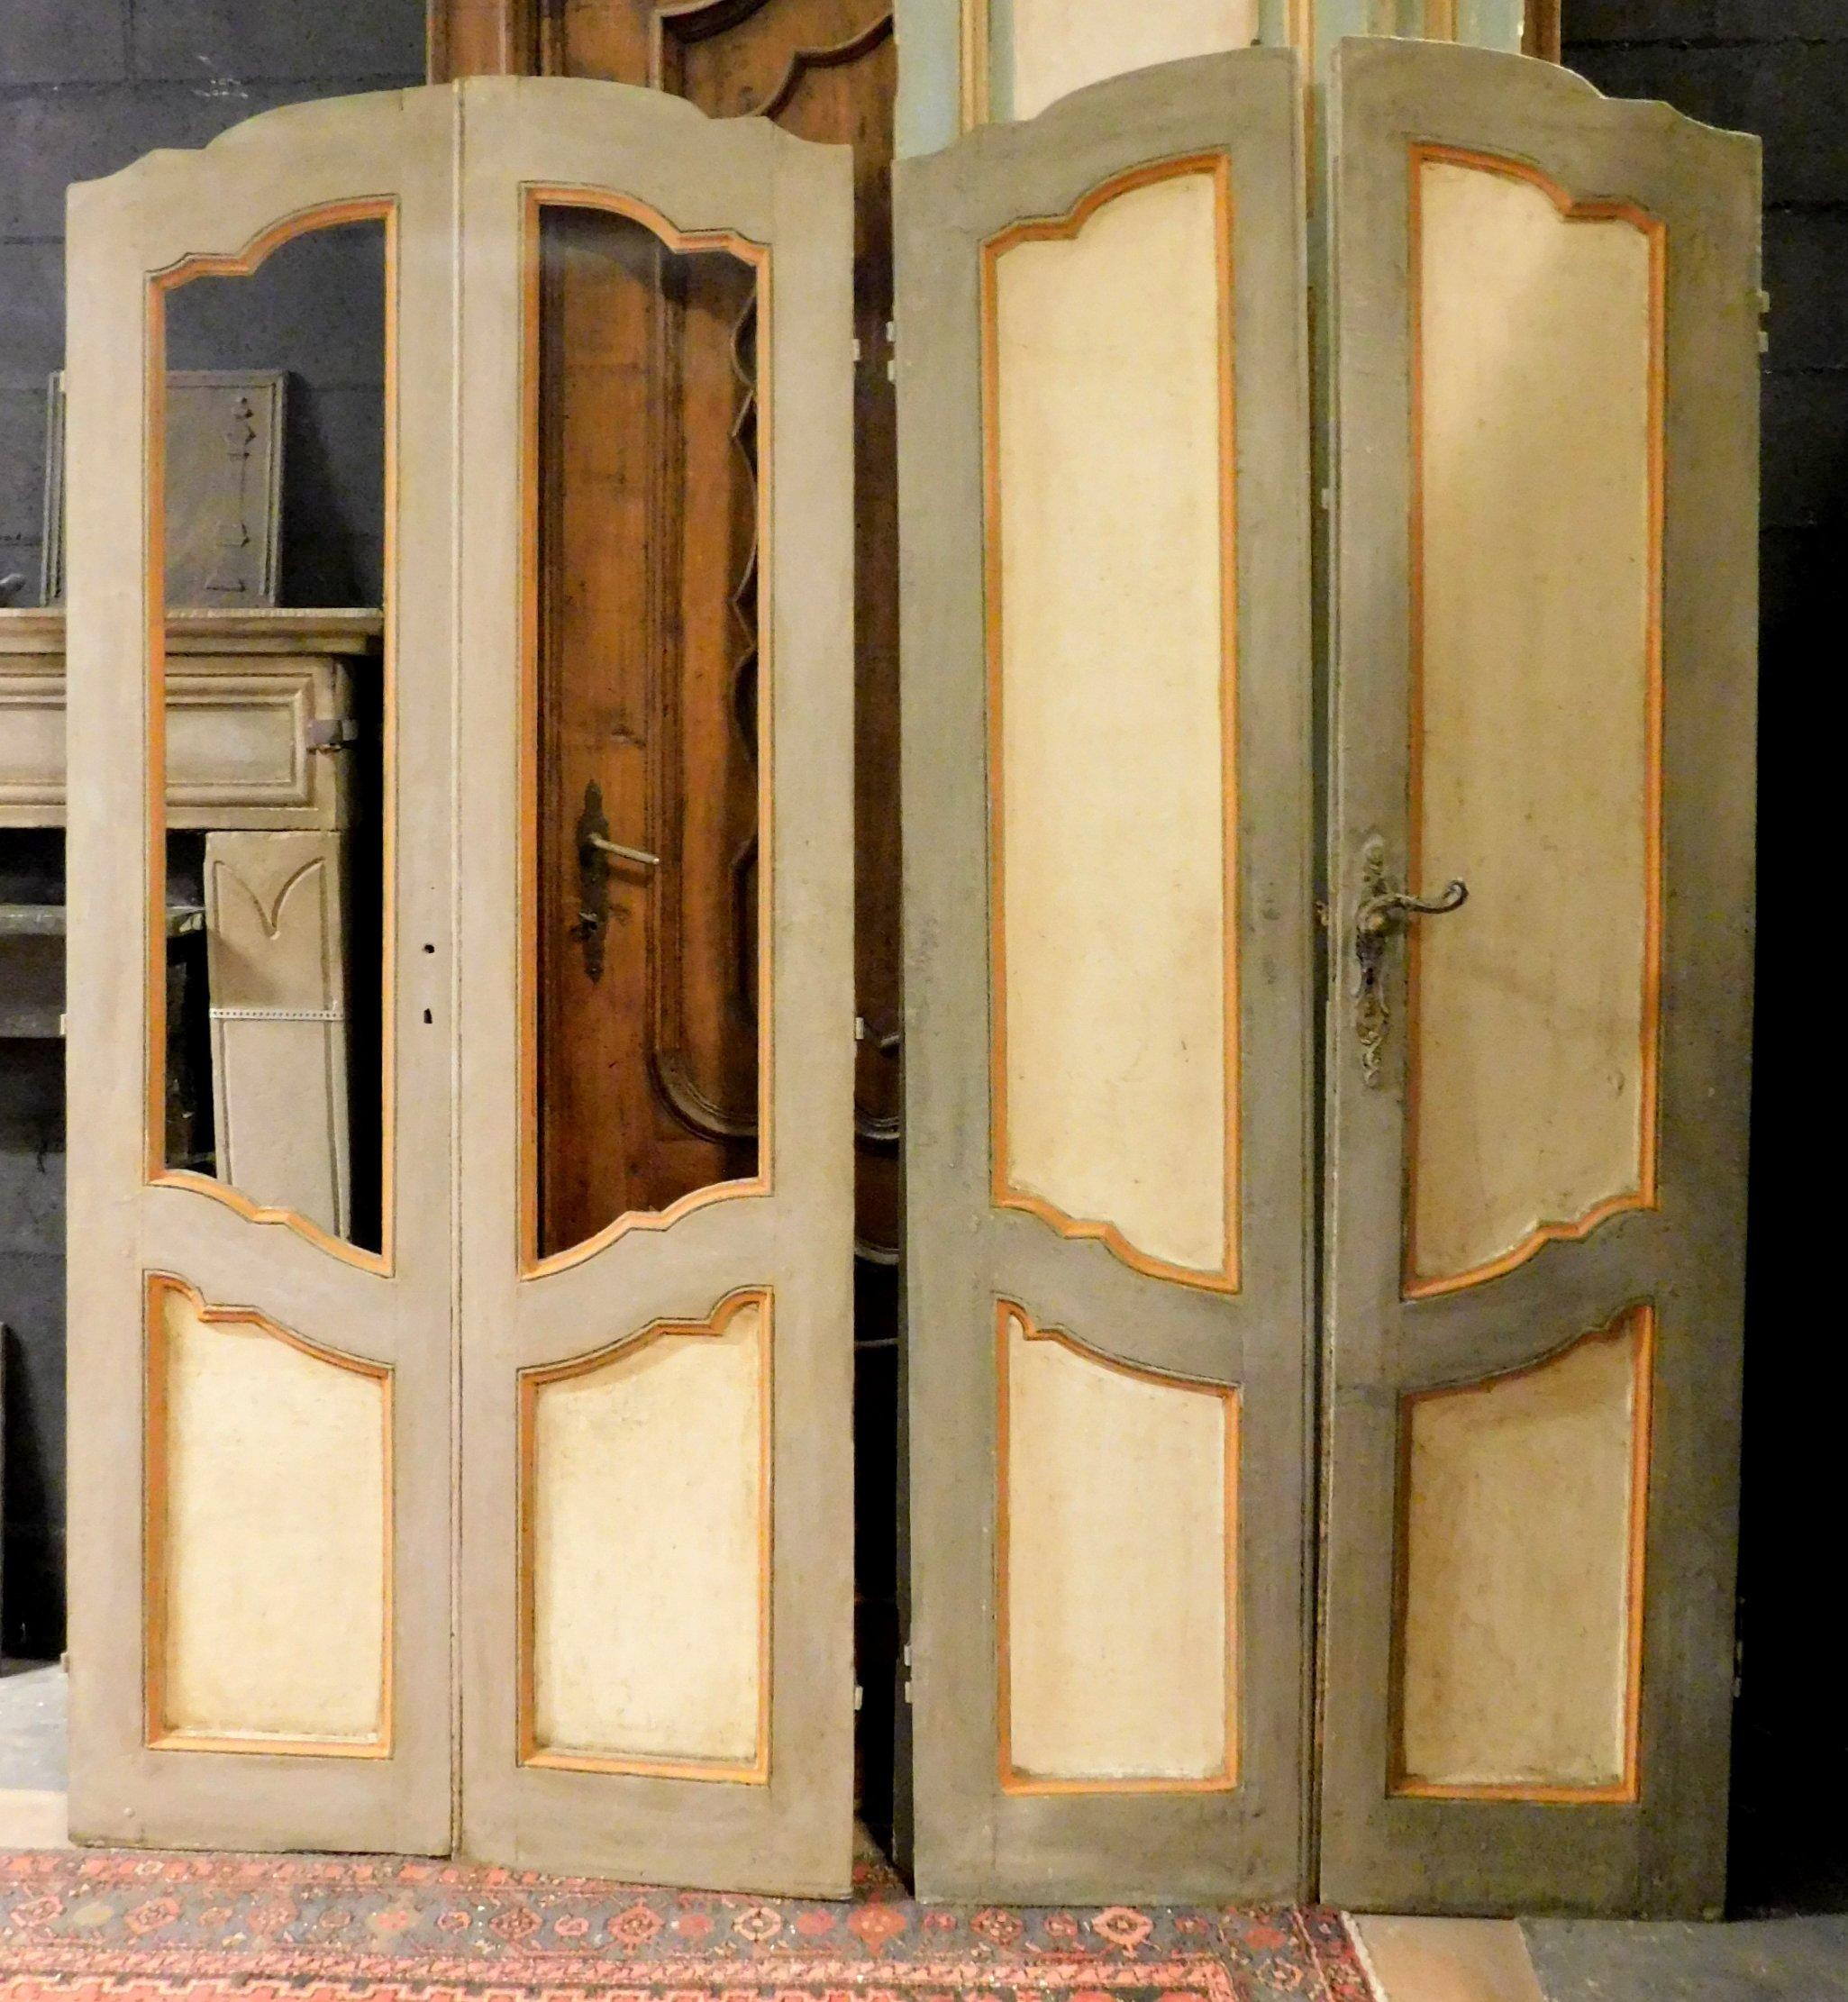 Antique set of 2 double doors, one with glass and one with paneling, coming from the same house and built in the same way, hand lacquered and sculpted arched, without frame and with any glass to put on, we sell separately with the possibility to